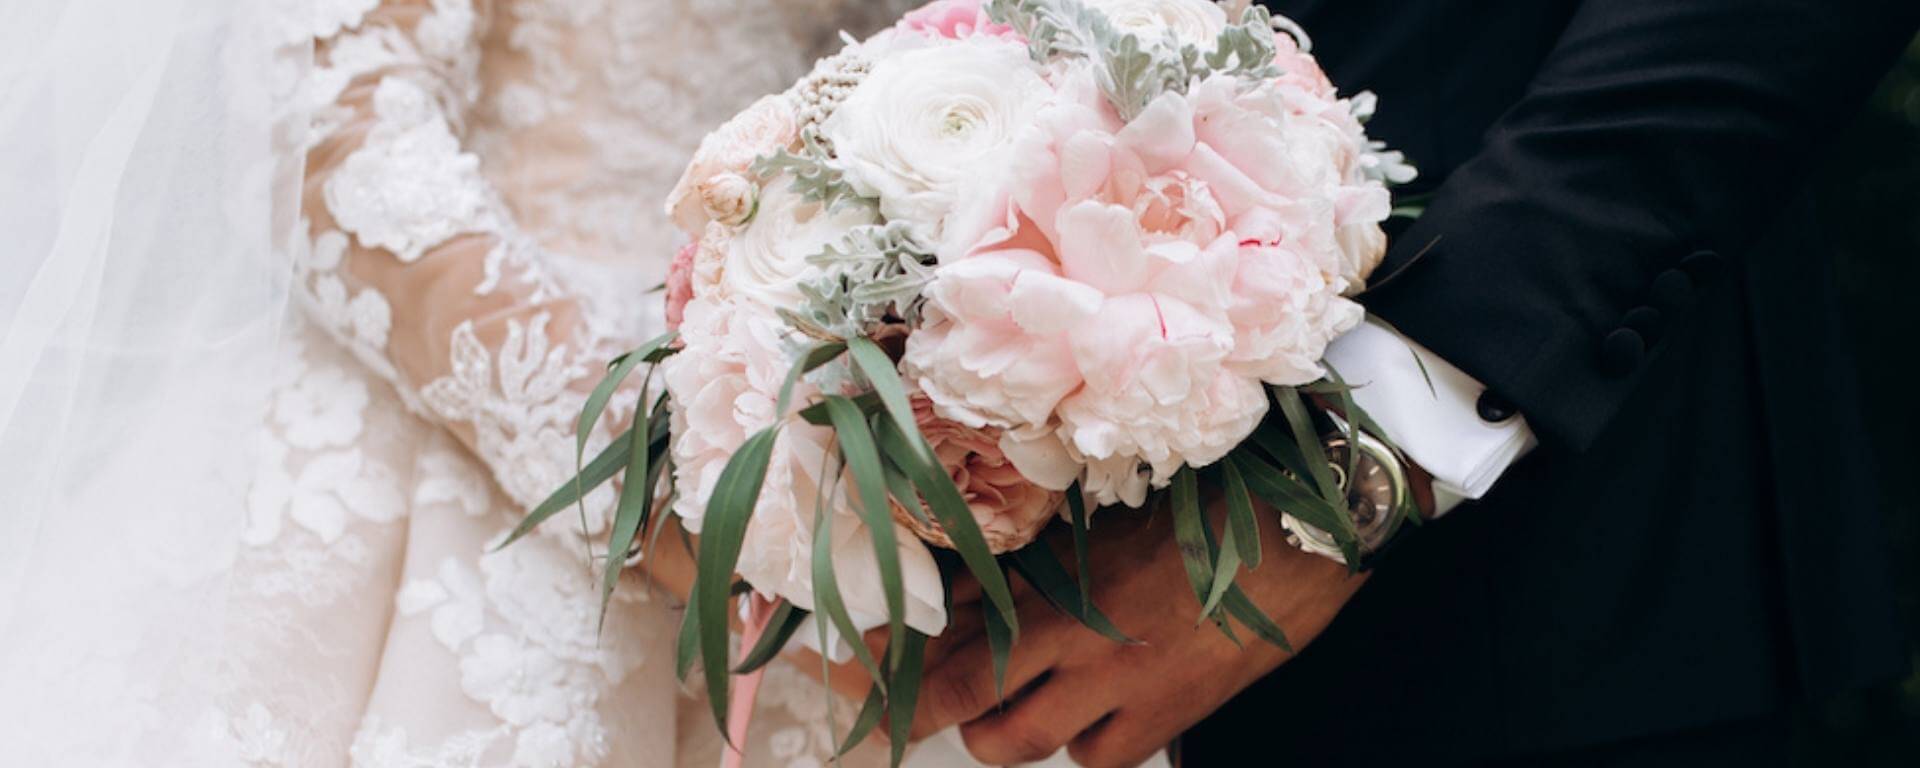 Front view of groom and brides hands together are holding wedding pink bouquet